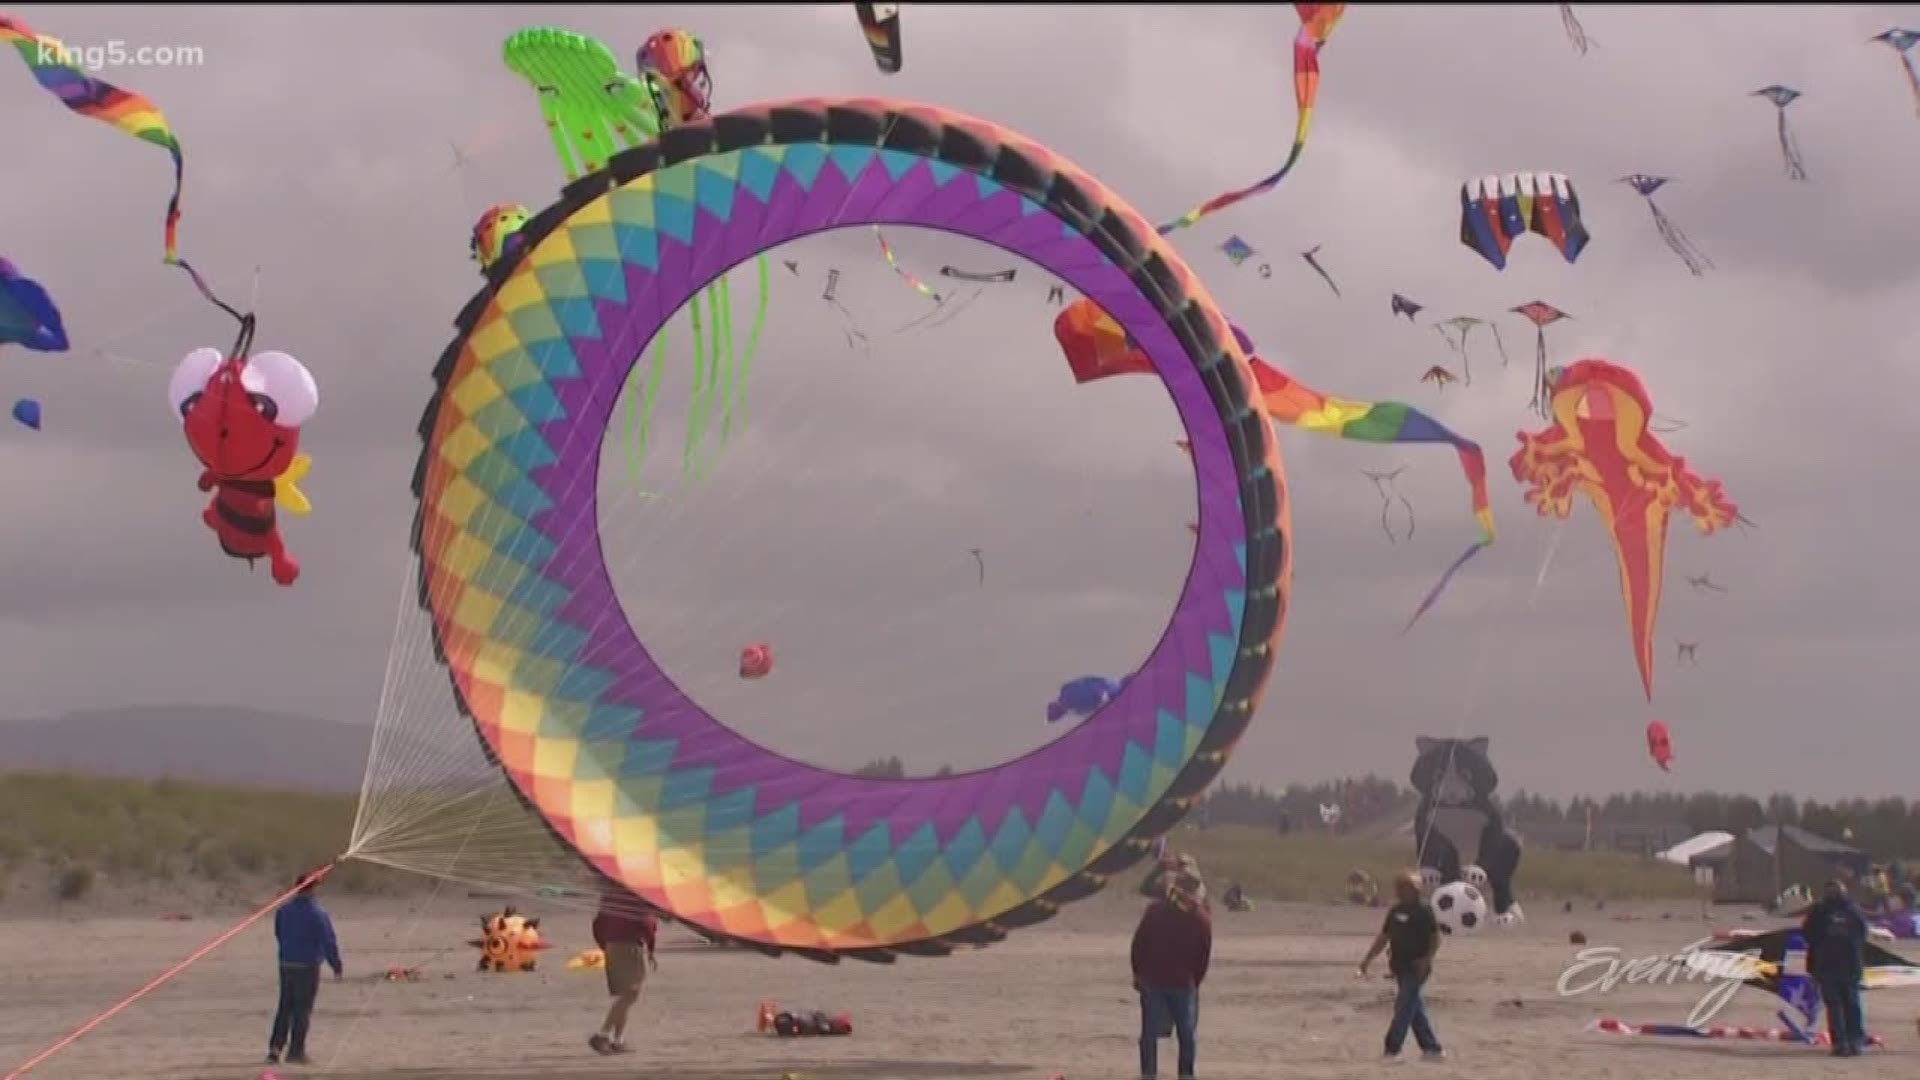 The 38th annual Washington State International Kite Festival was held this past weekend in Long Beach. The festival brings in kites and kite lovers from all across the globe.